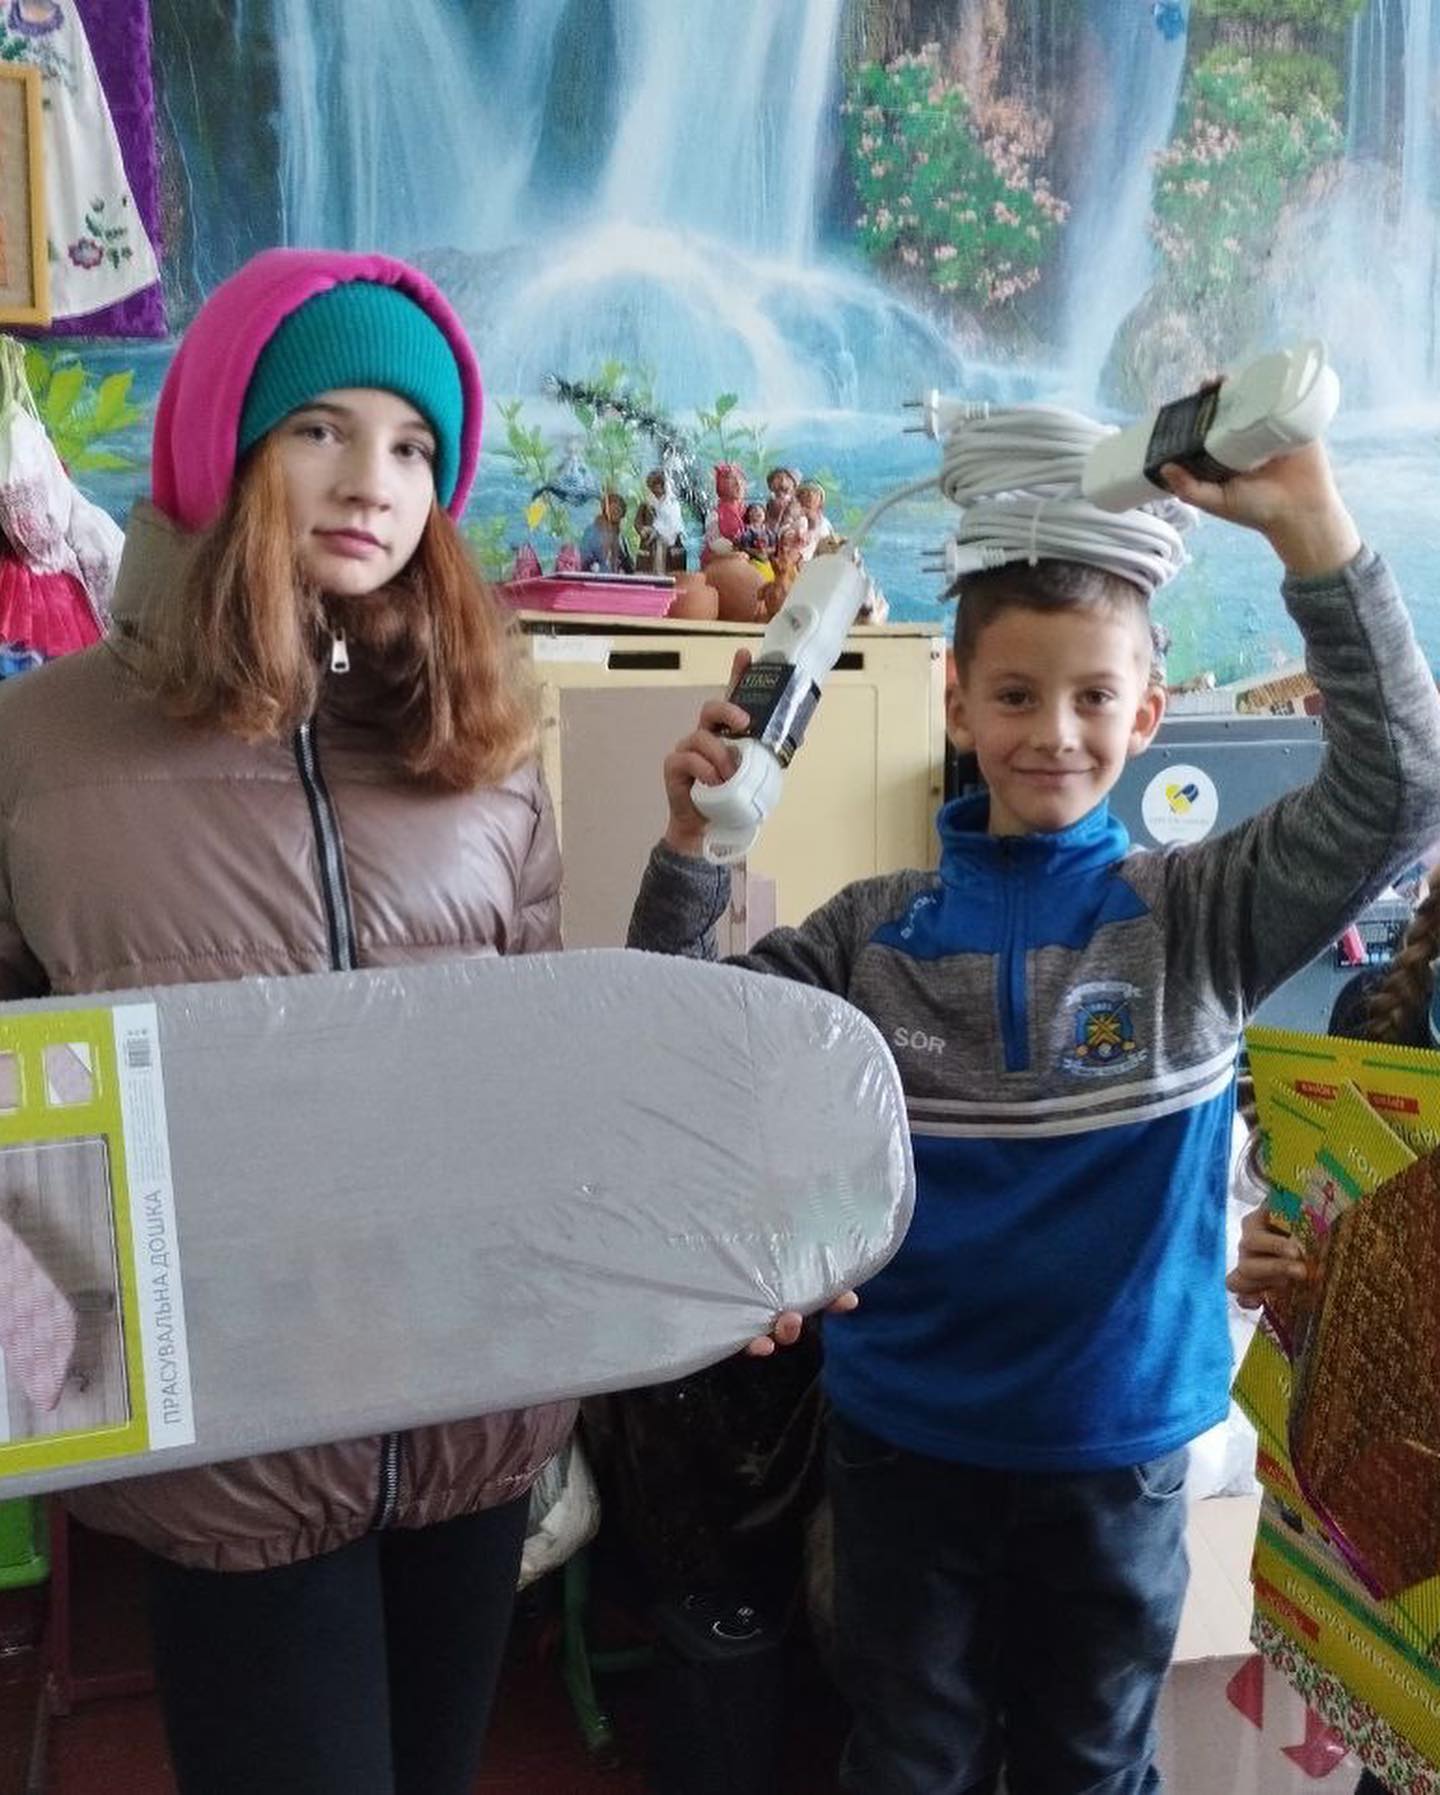 Two children holding skateboards in a room.